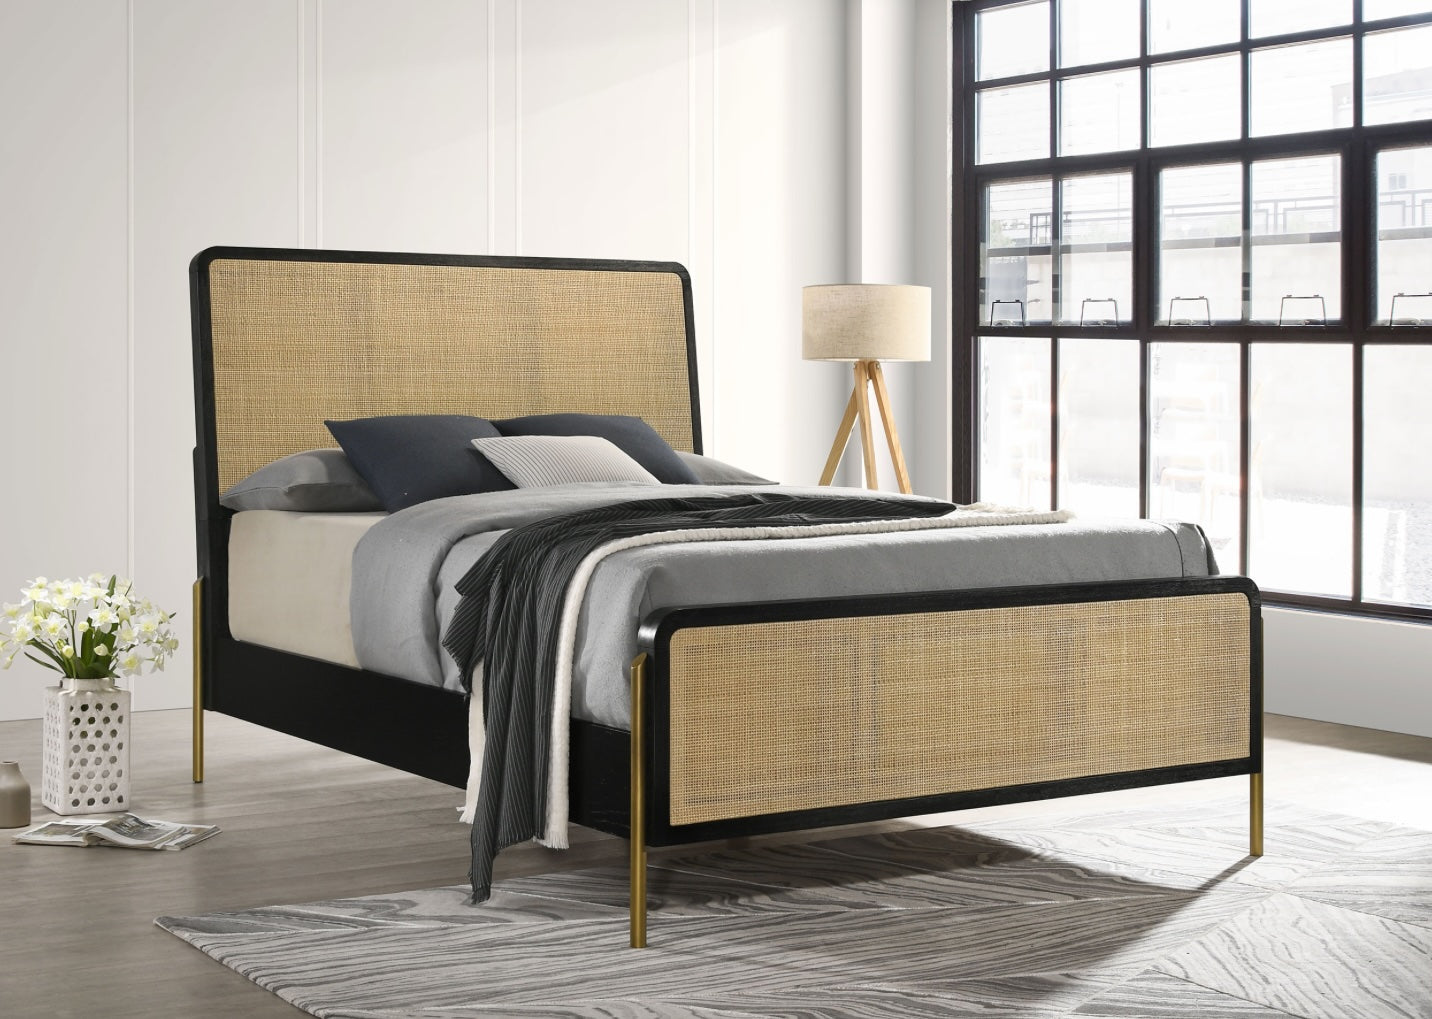 Arini Queen Bed With Woven Rattan Headboard Black And Natural